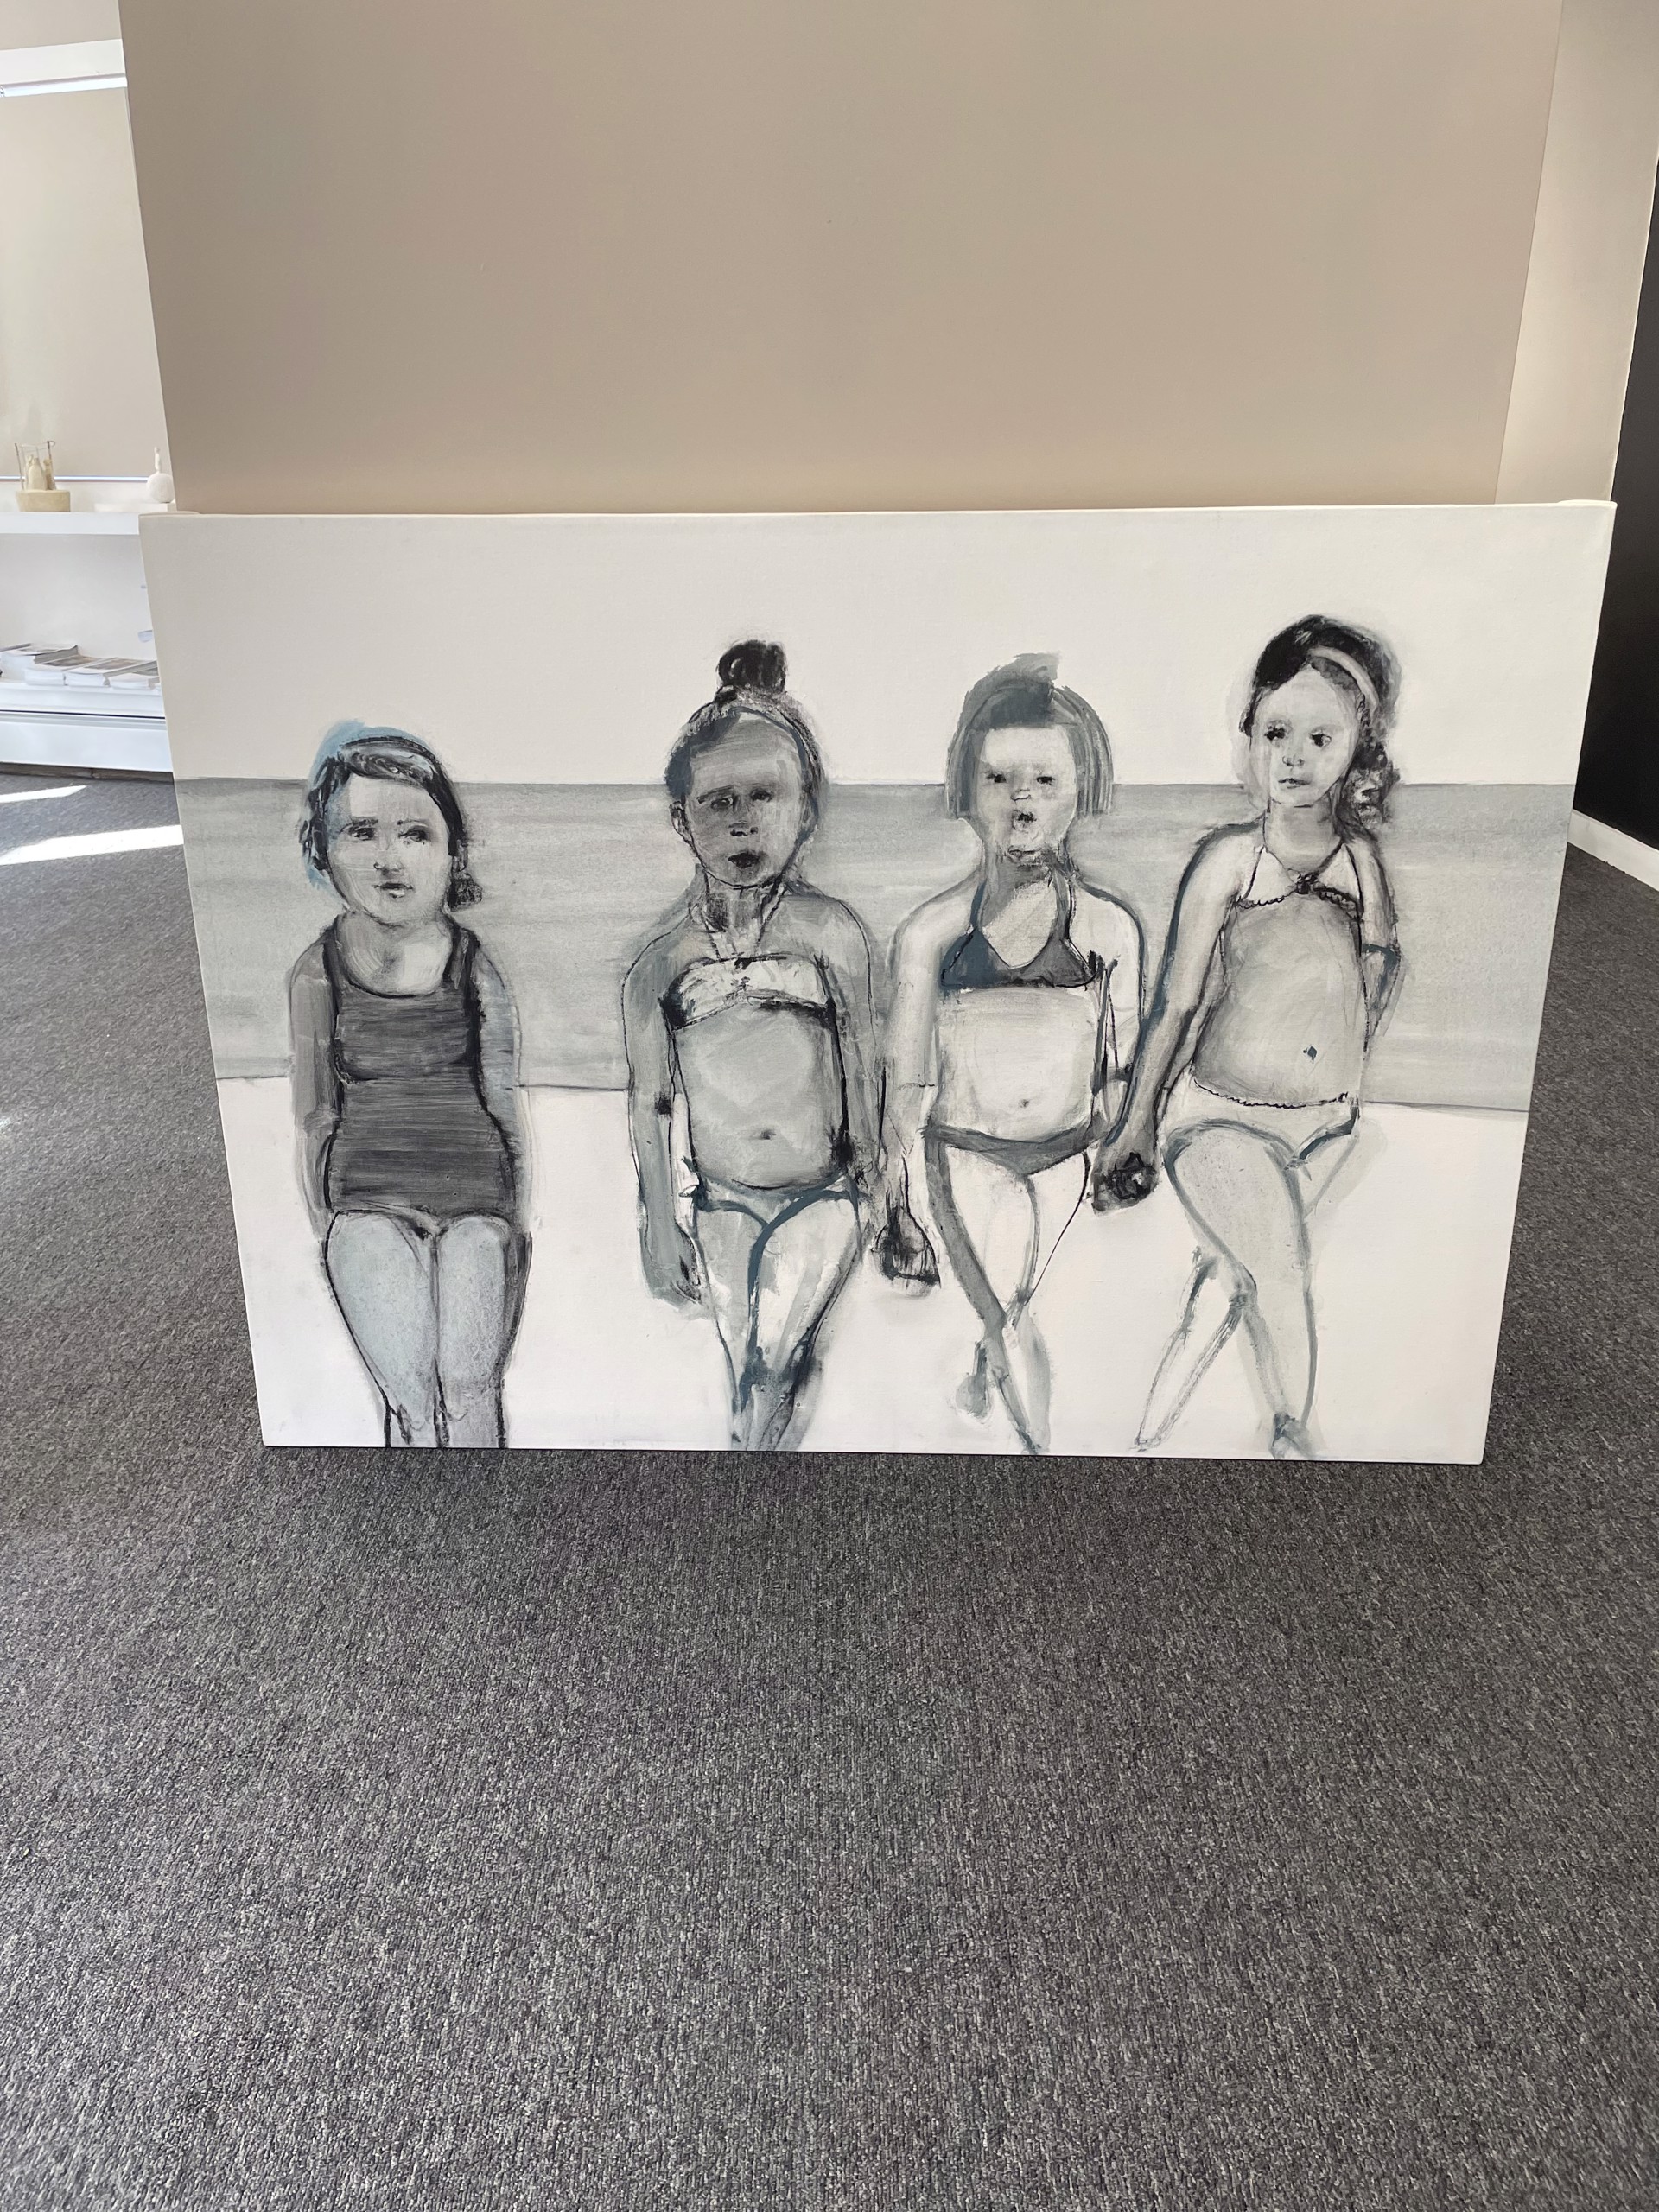 YOUNG LADIES AT THE BEACH by CHRISTINA THWAITES (Figures)